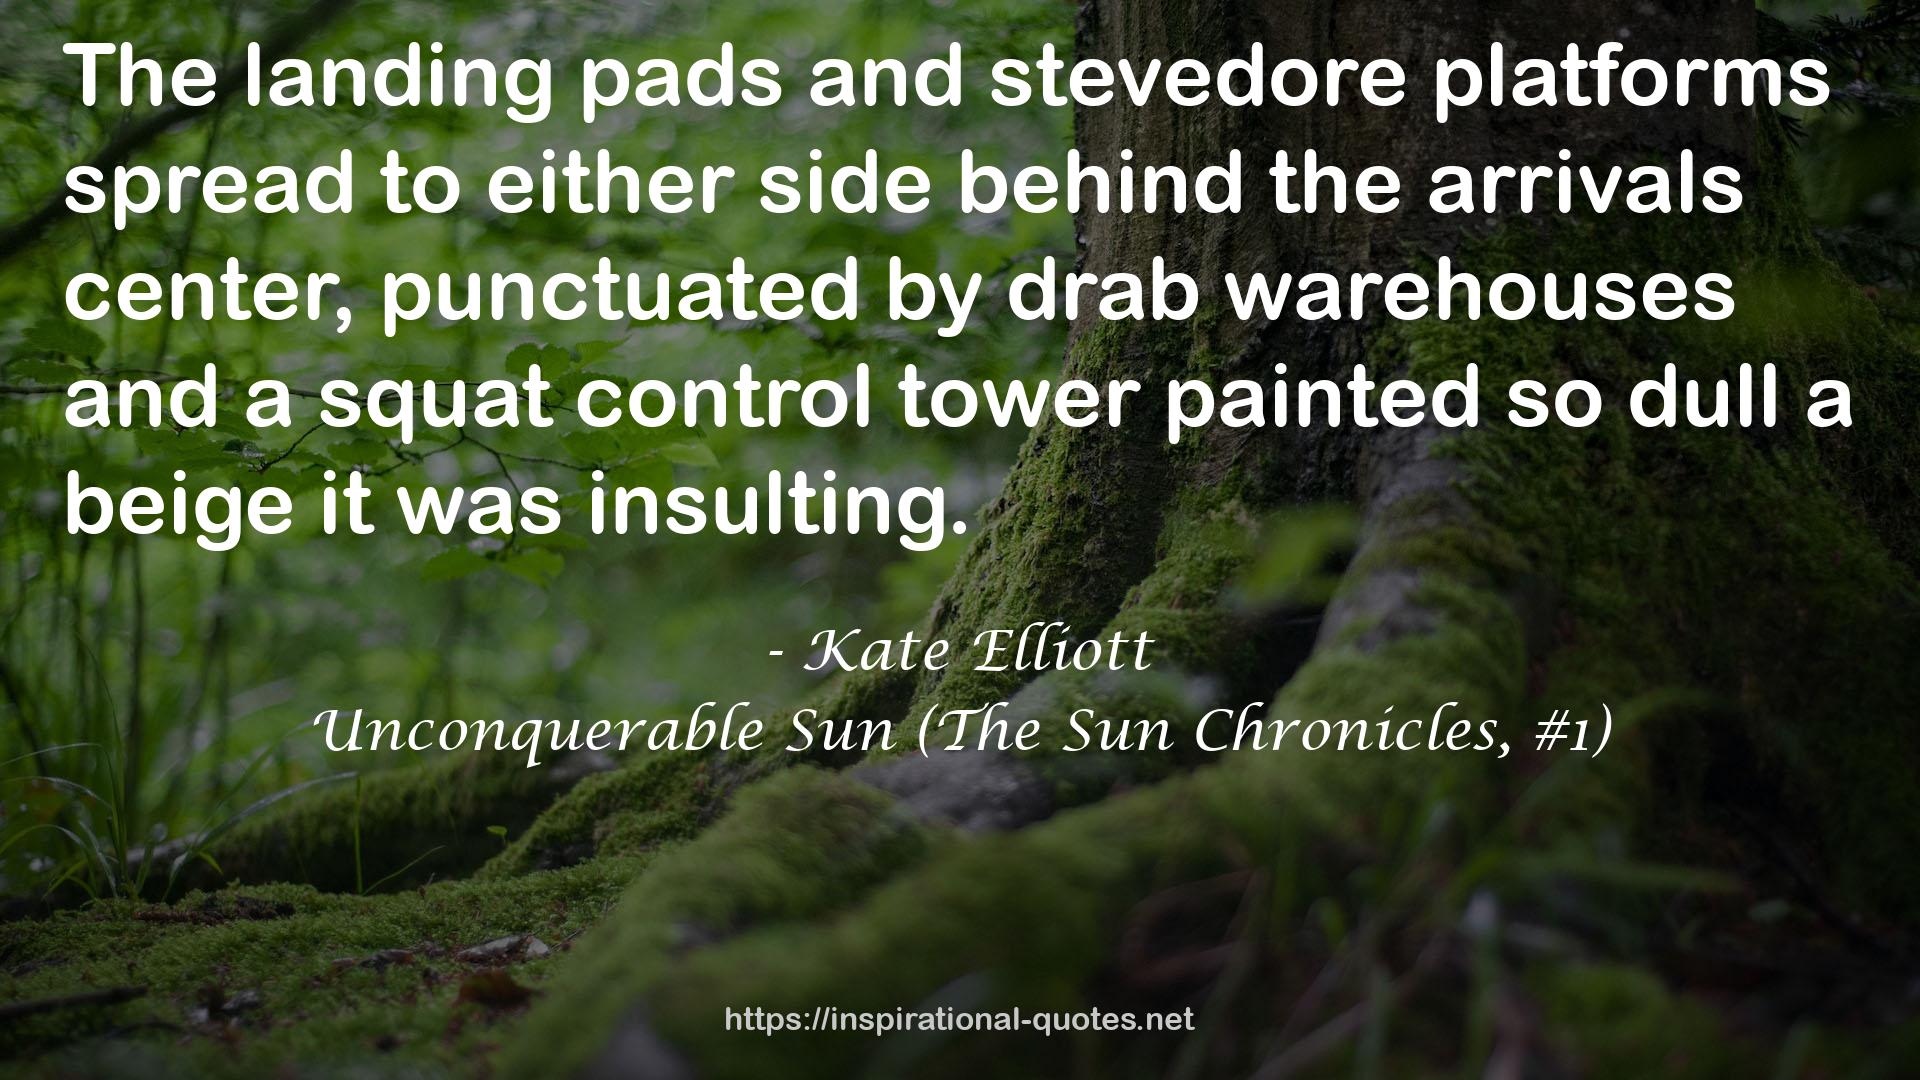 Unconquerable Sun (The Sun Chronicles, #1) QUOTES